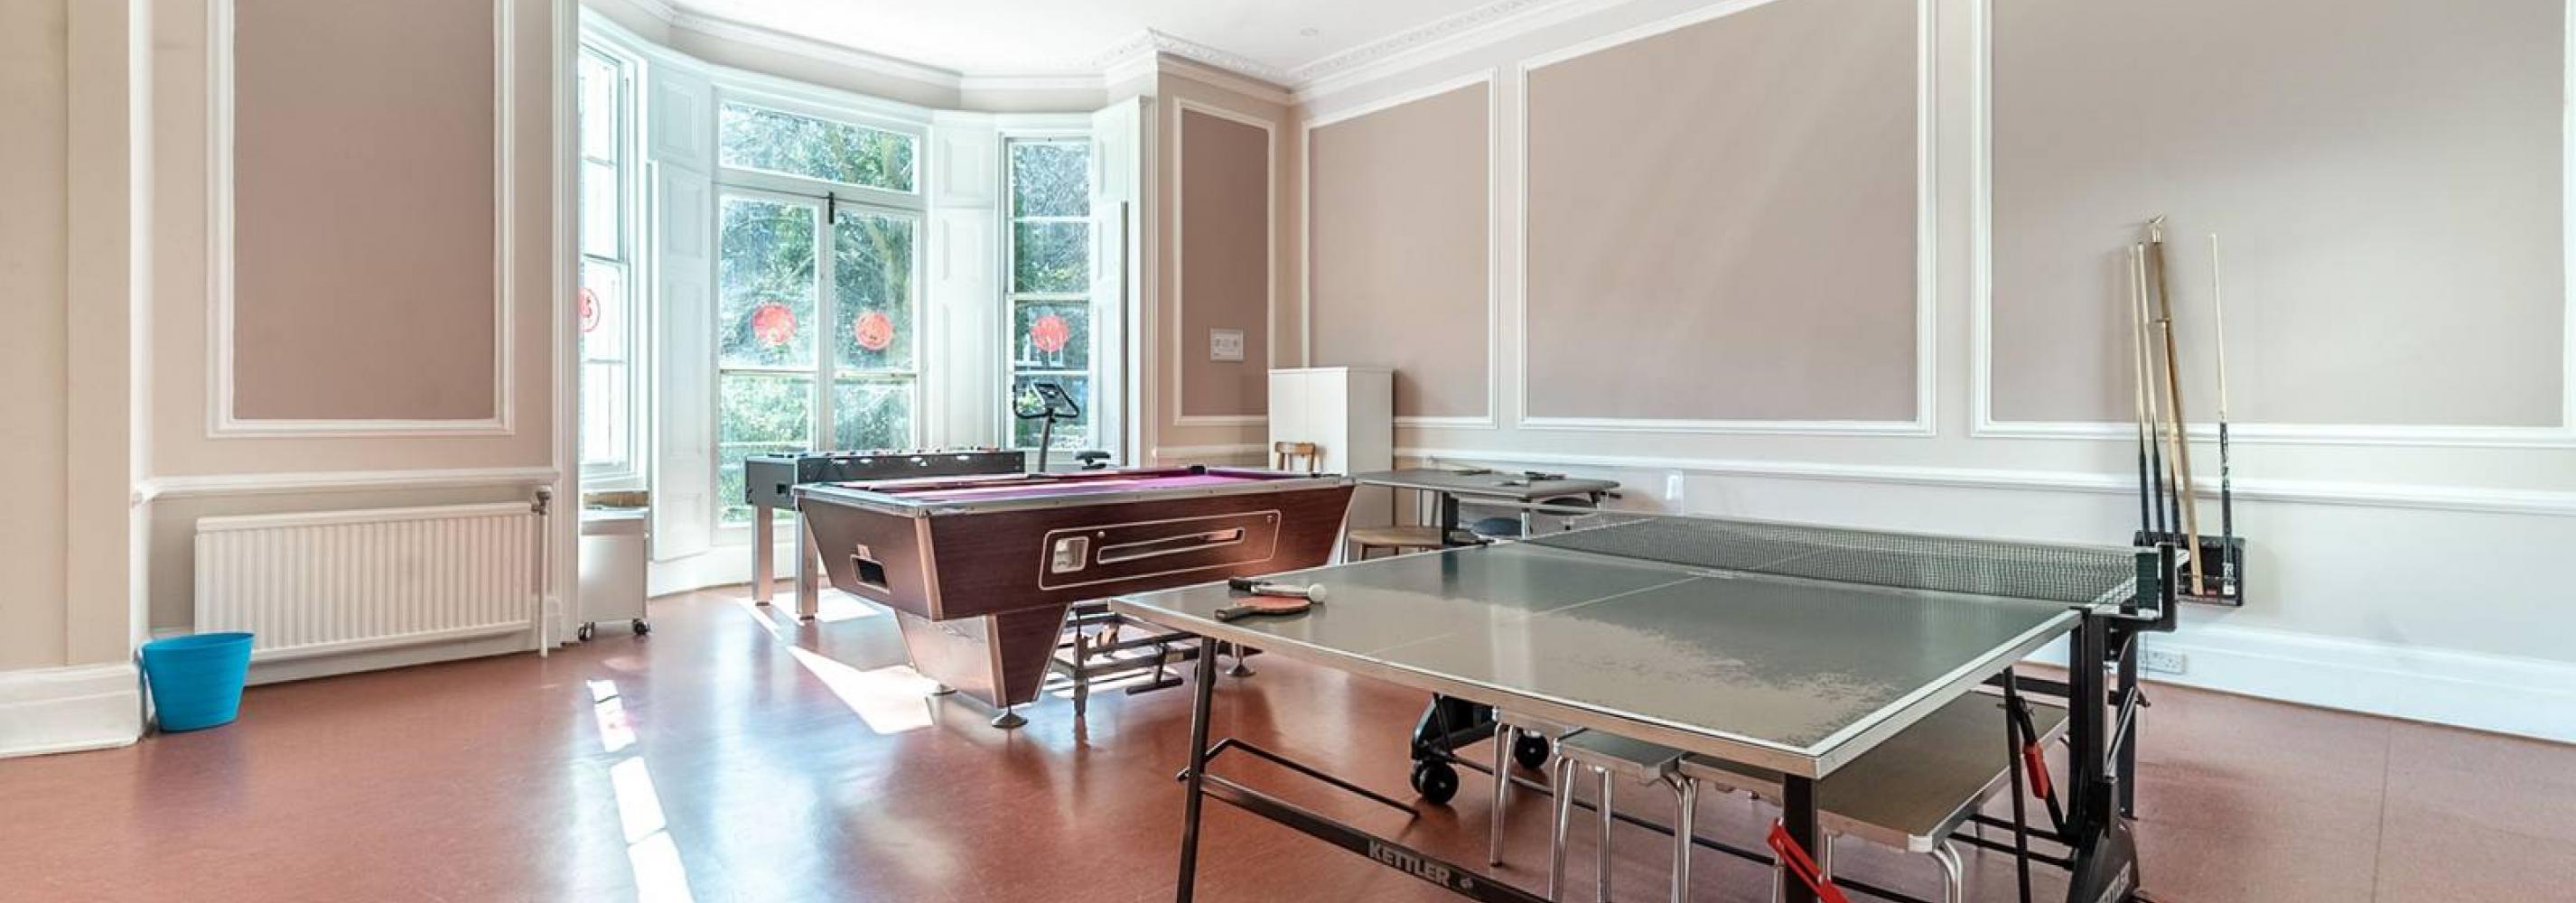 Game Room of the student accommodation with access to private garden in Kensington